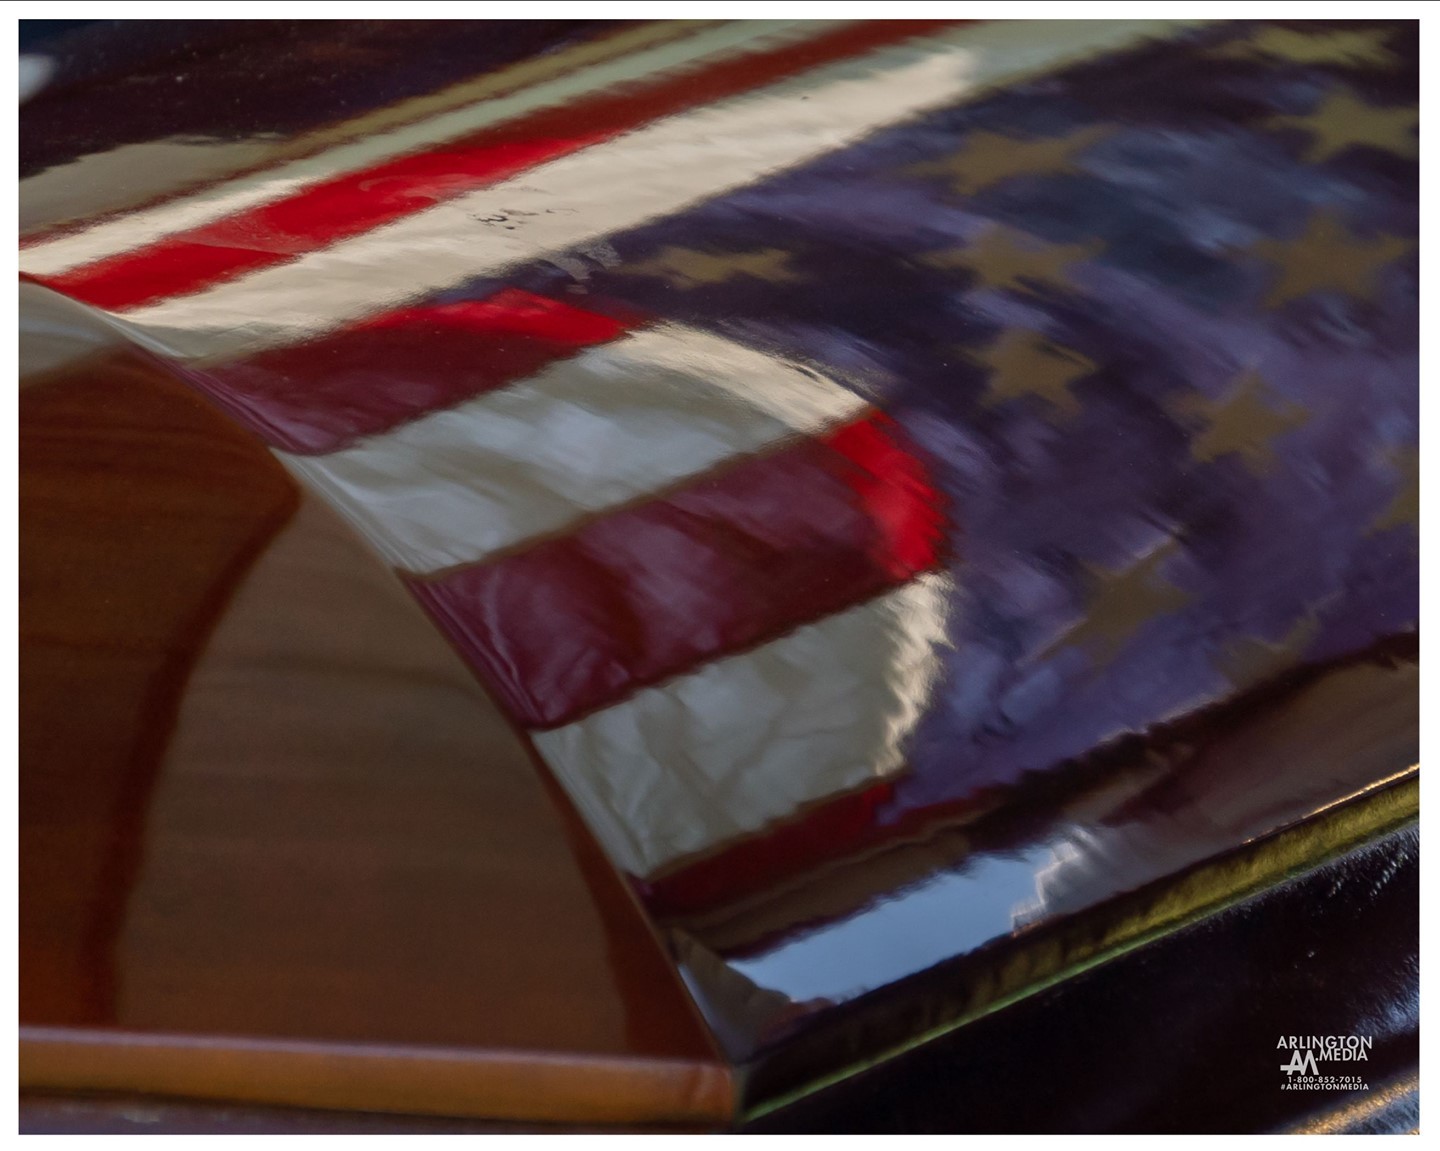 A flag is seen reflected in the casket of an honored veteran during a full honors service in Section 57 of Arlington National Cemetery.  This moment was captured by our @arlingtonmedia team.